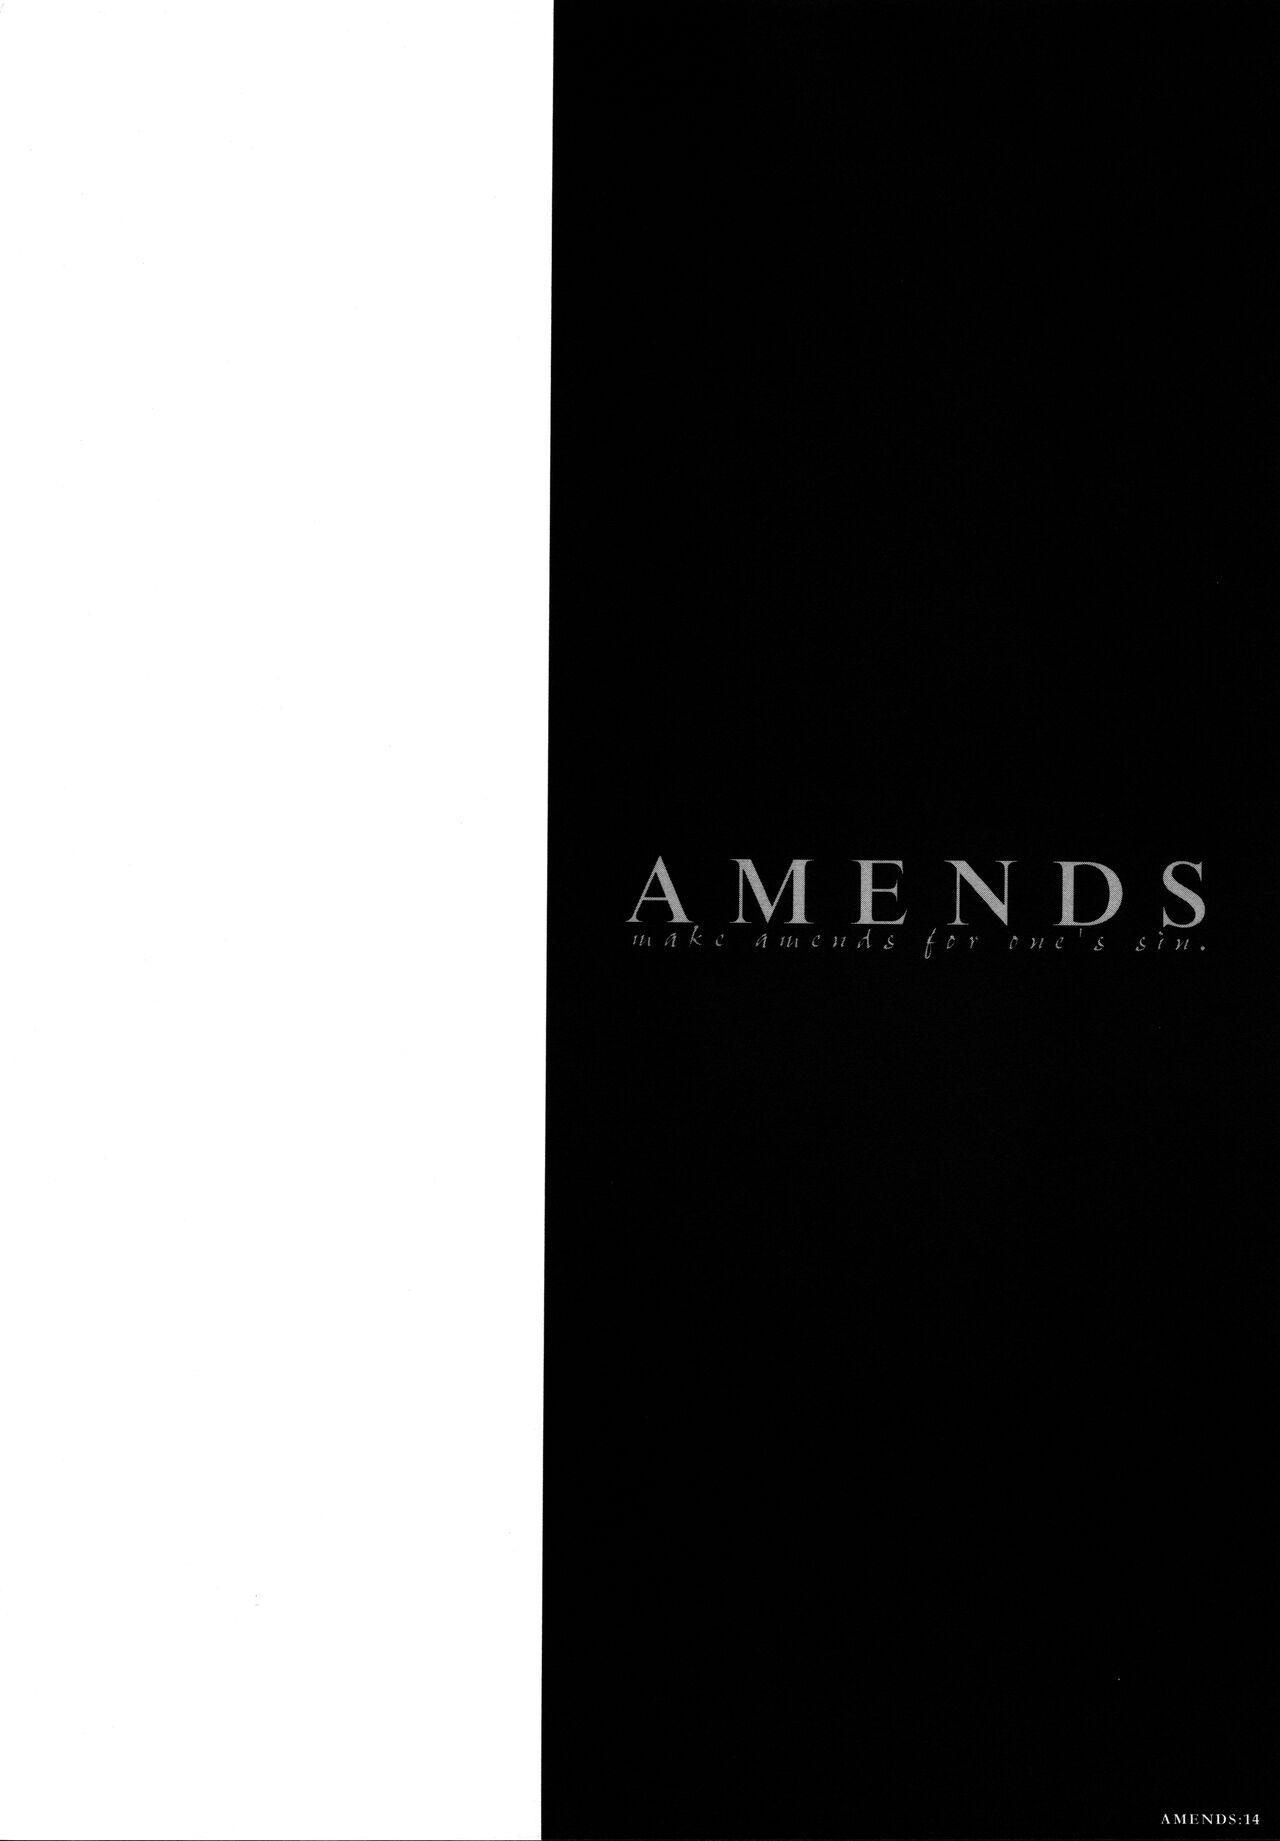 AMENDS - make amends for one's sin. 13